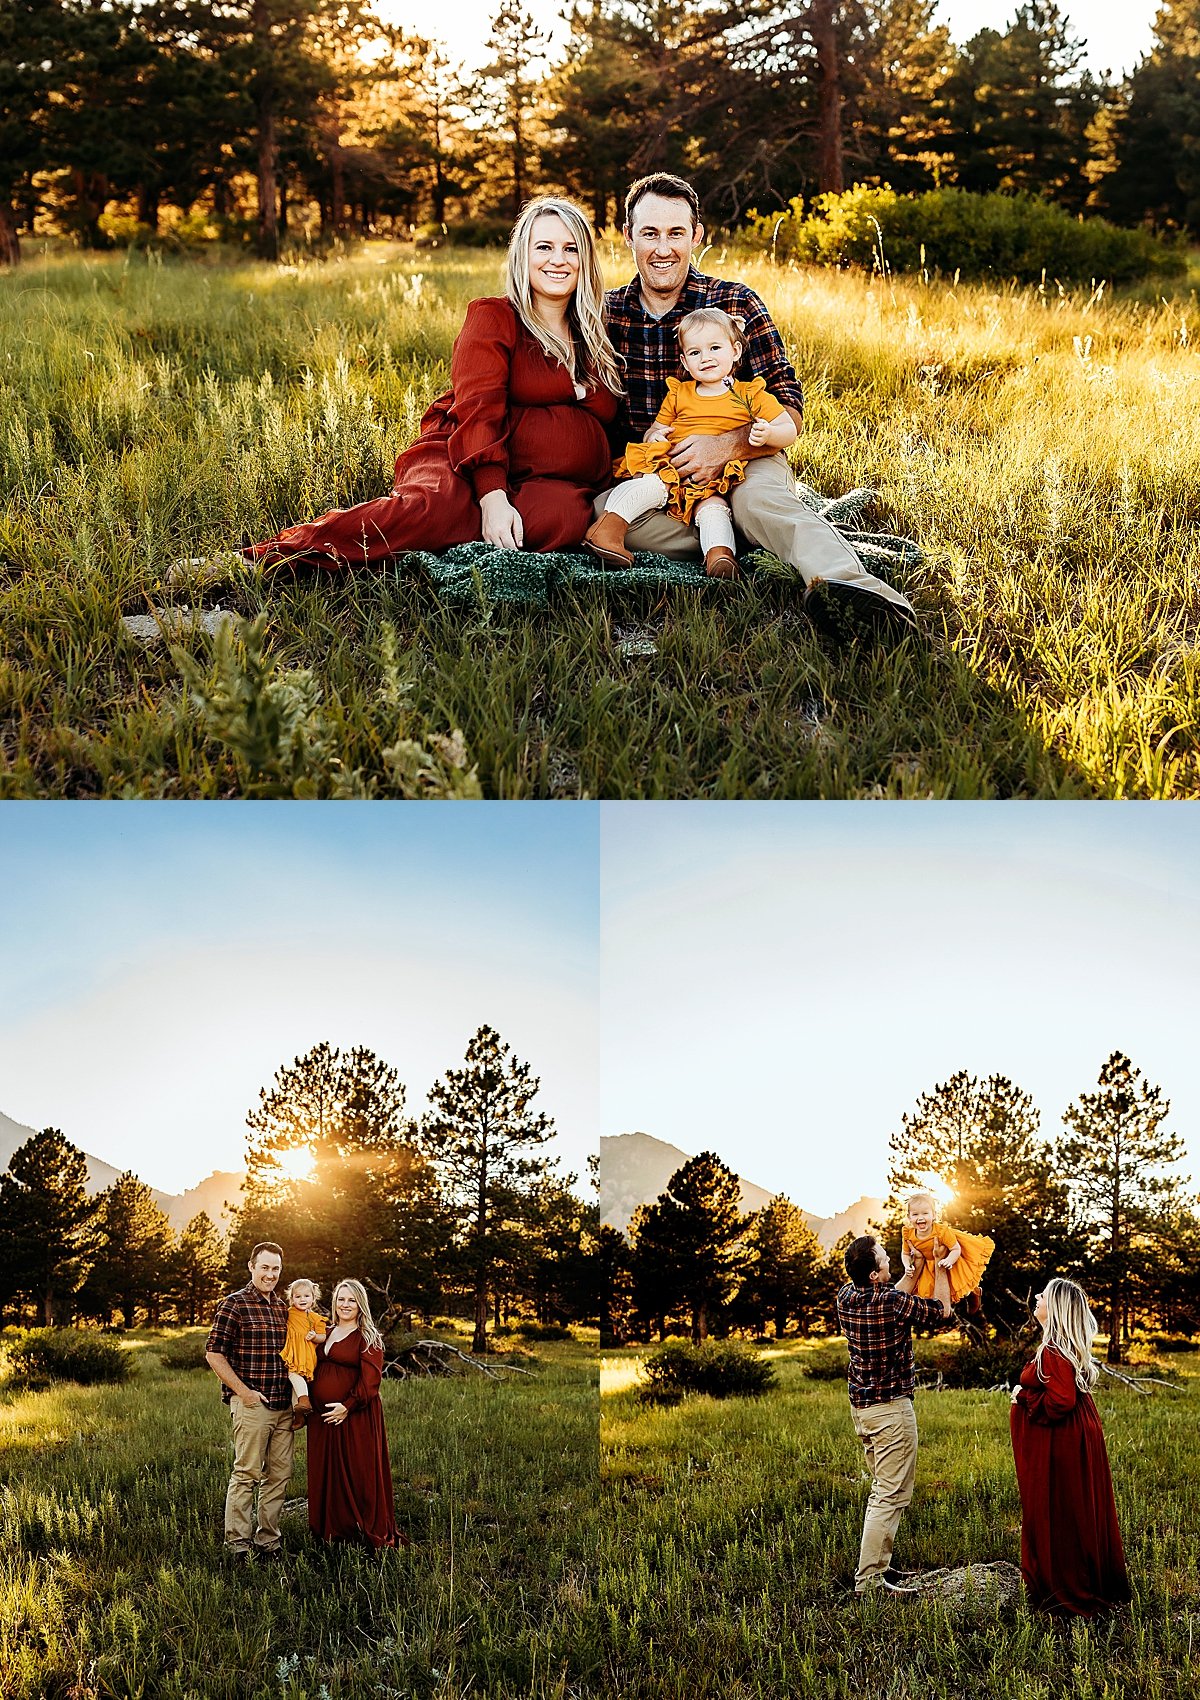  Family of three sitting in field in Colorado at Sunset by Christa paustenbaugh photography 